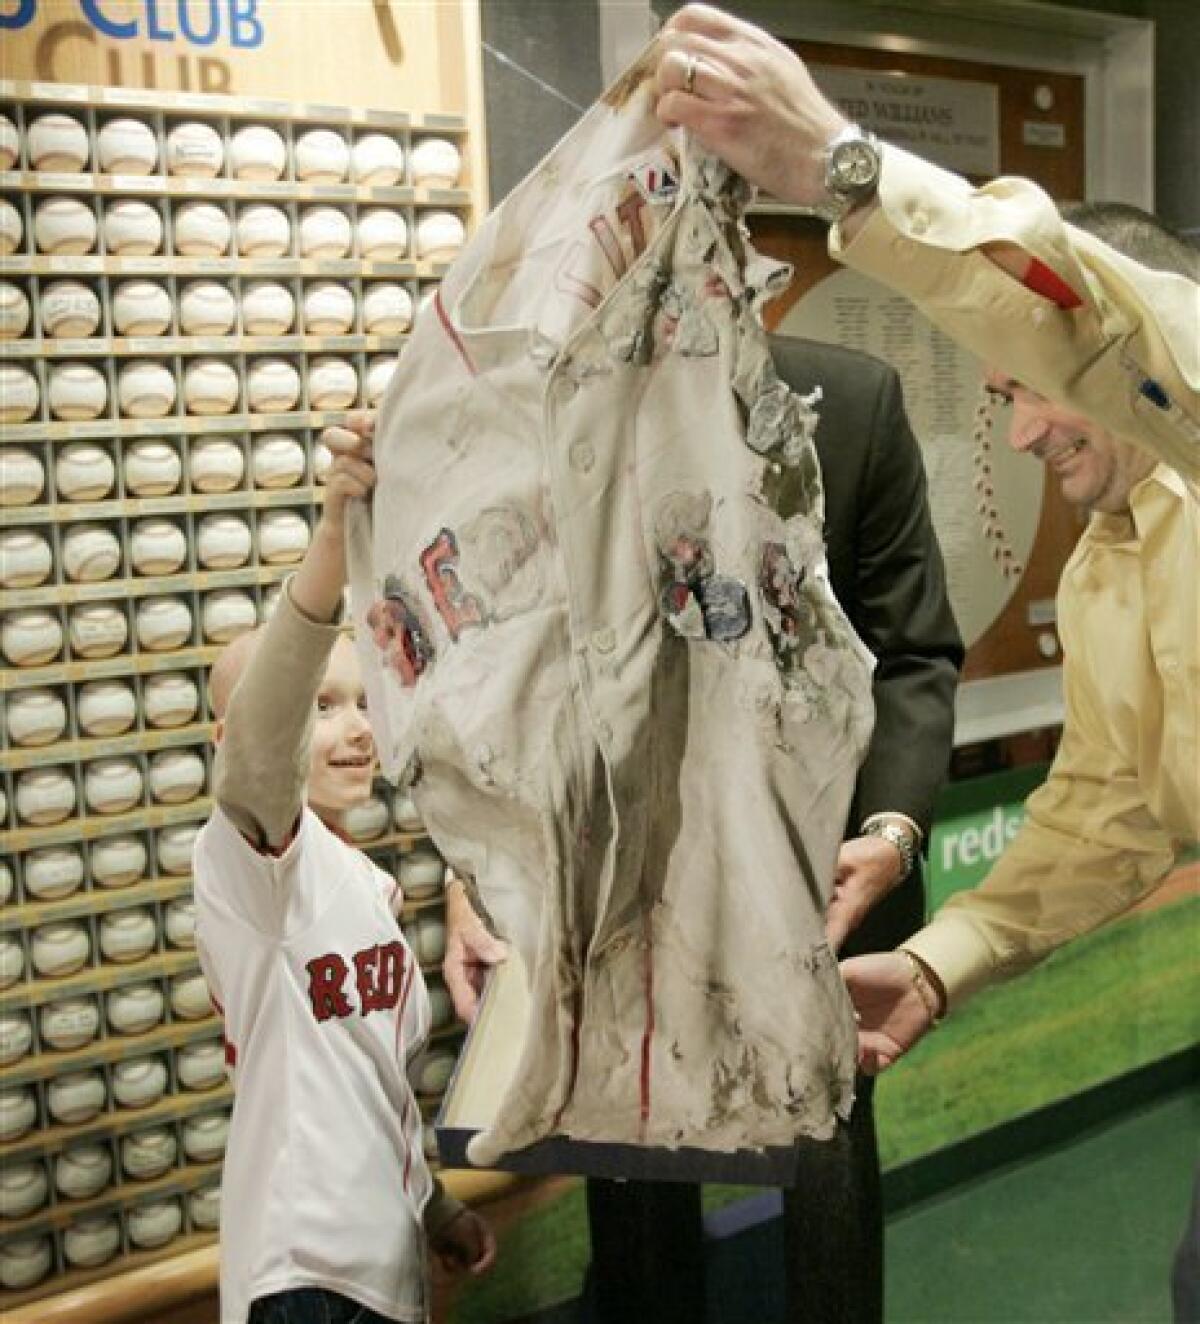 old red sox jersey